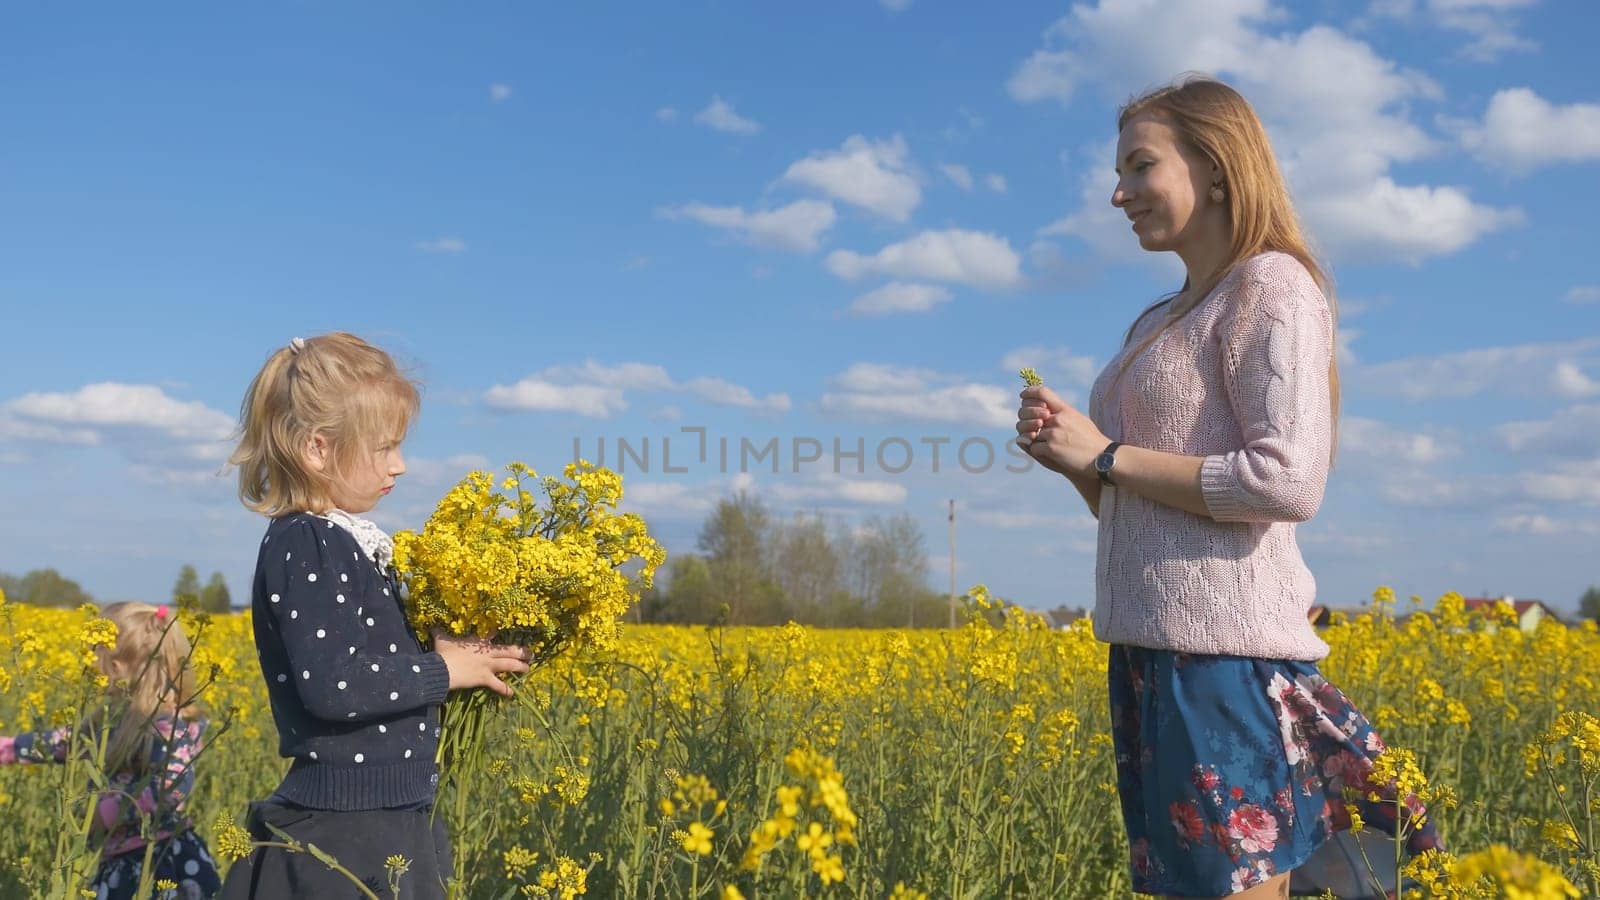 Grateful daughter gives her mother flowers in a rapeseed field. by DovidPro